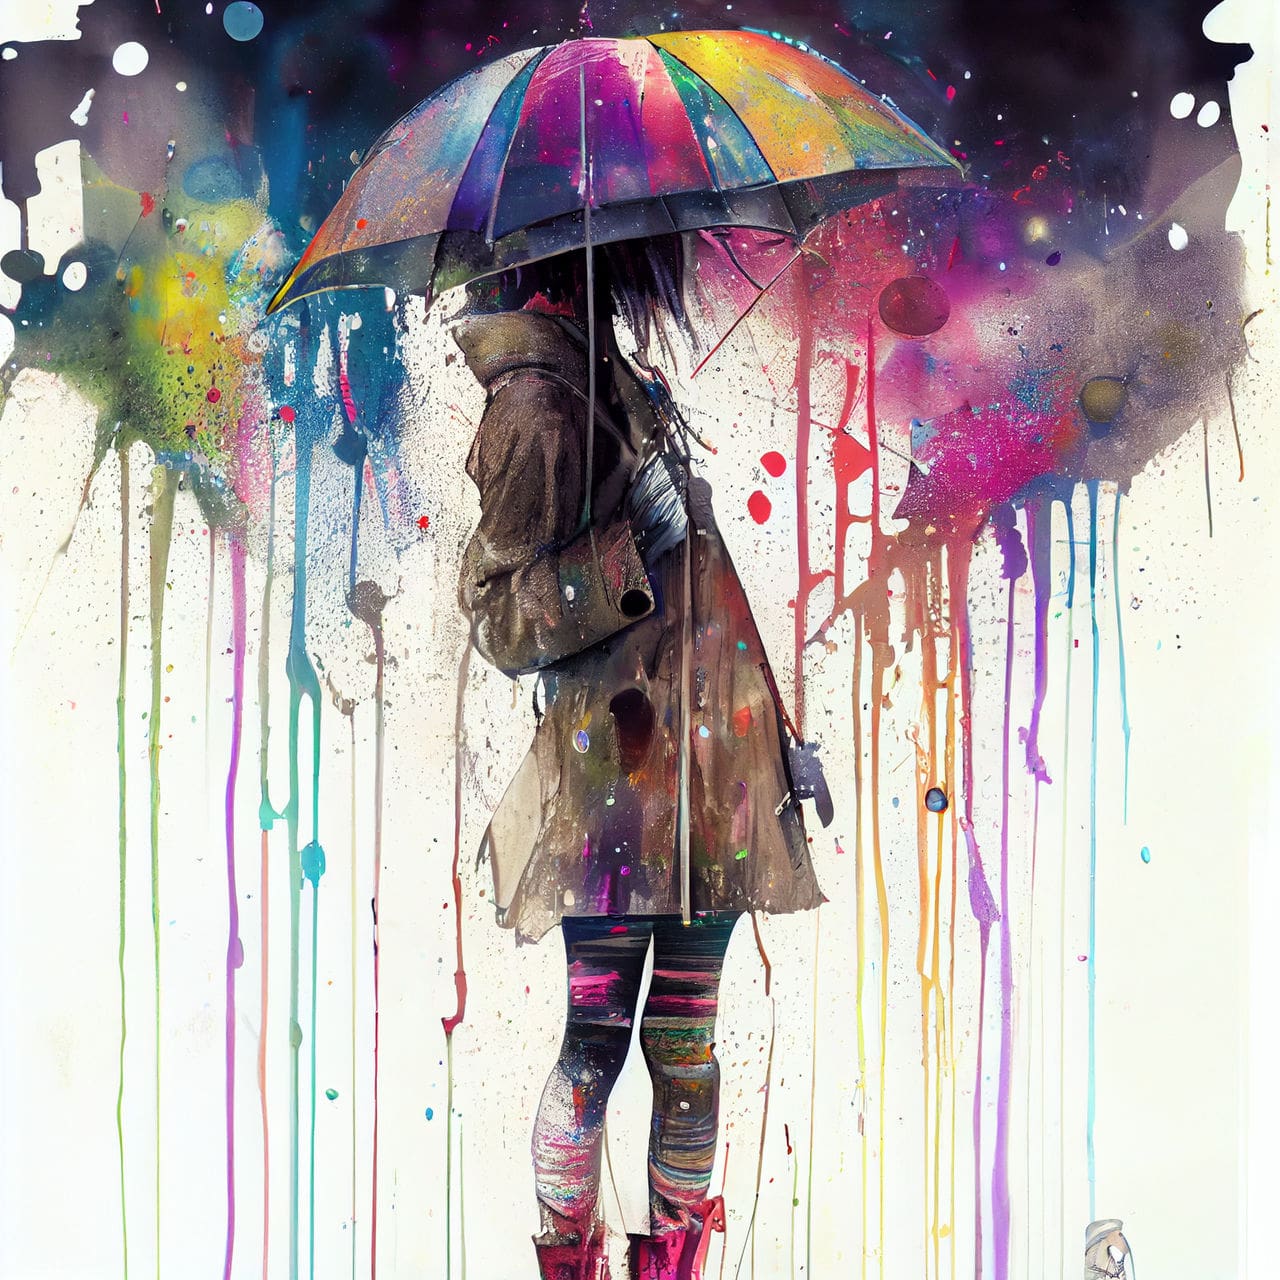 The Colors in the Rain 5 by Skorble on DeviantArt